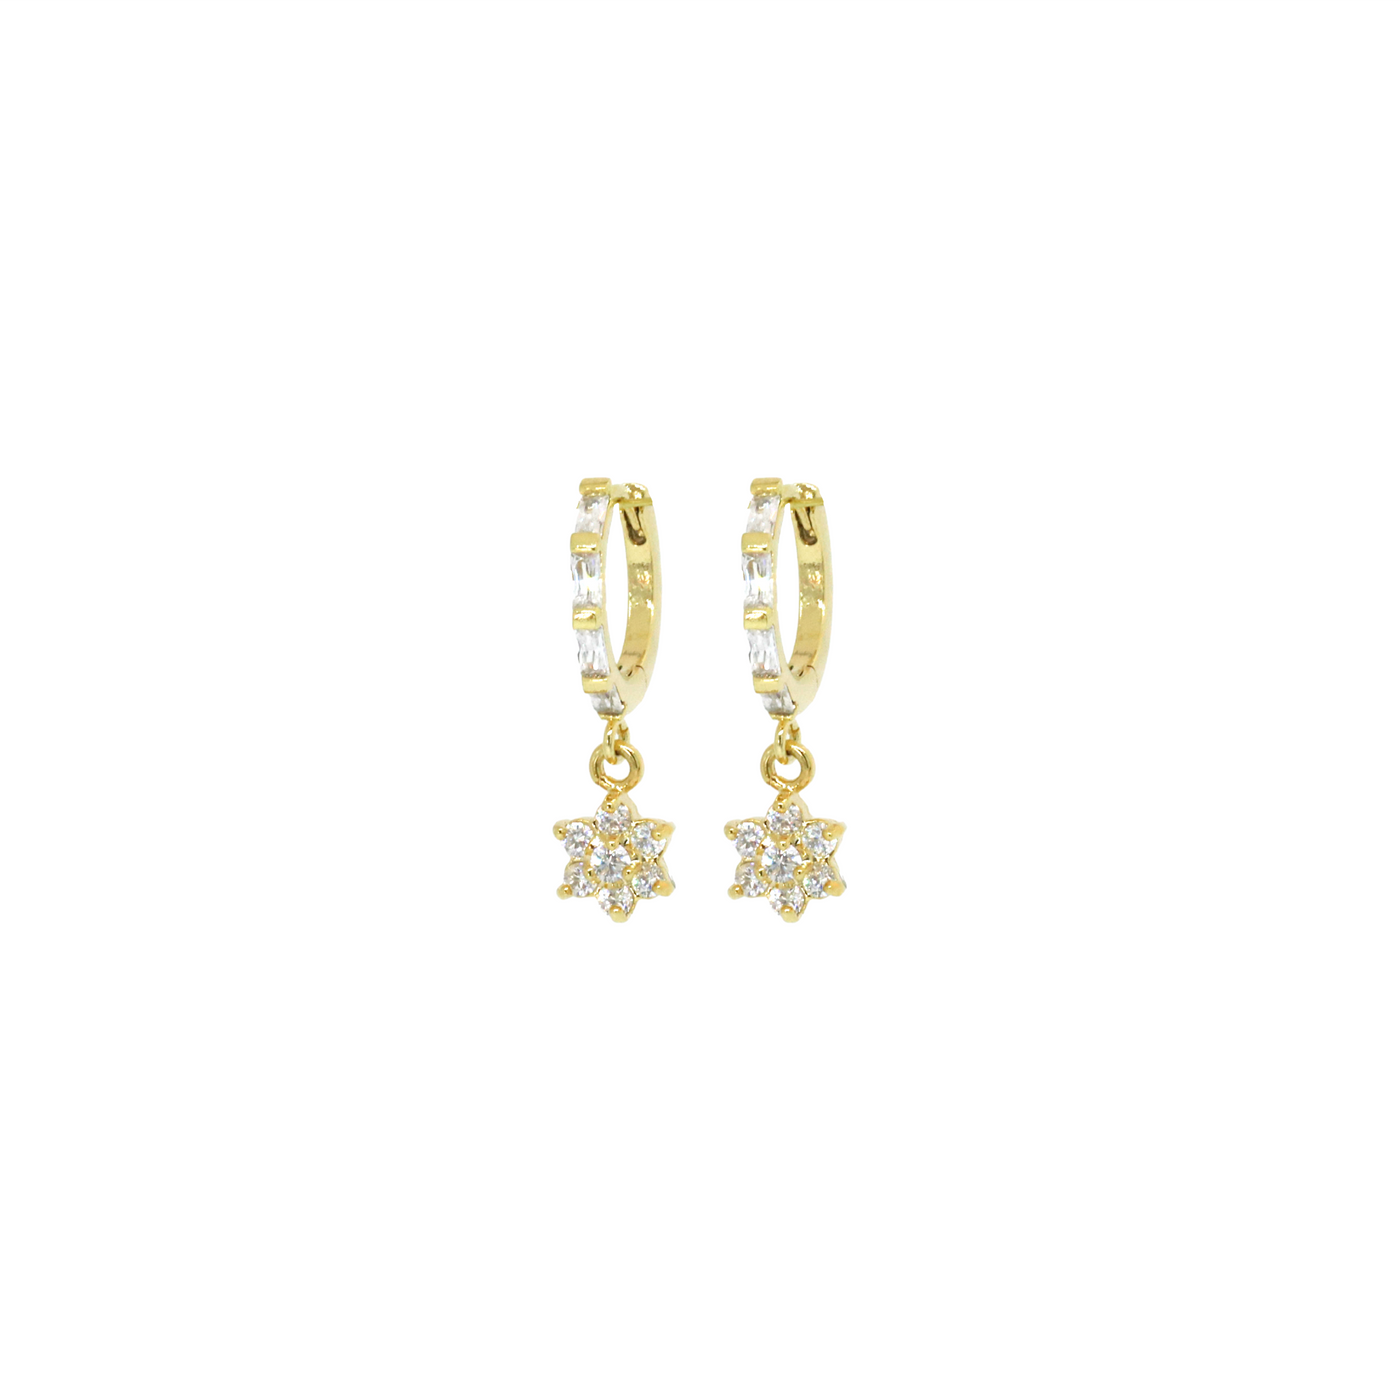 Gold huggie earrings with flower charms